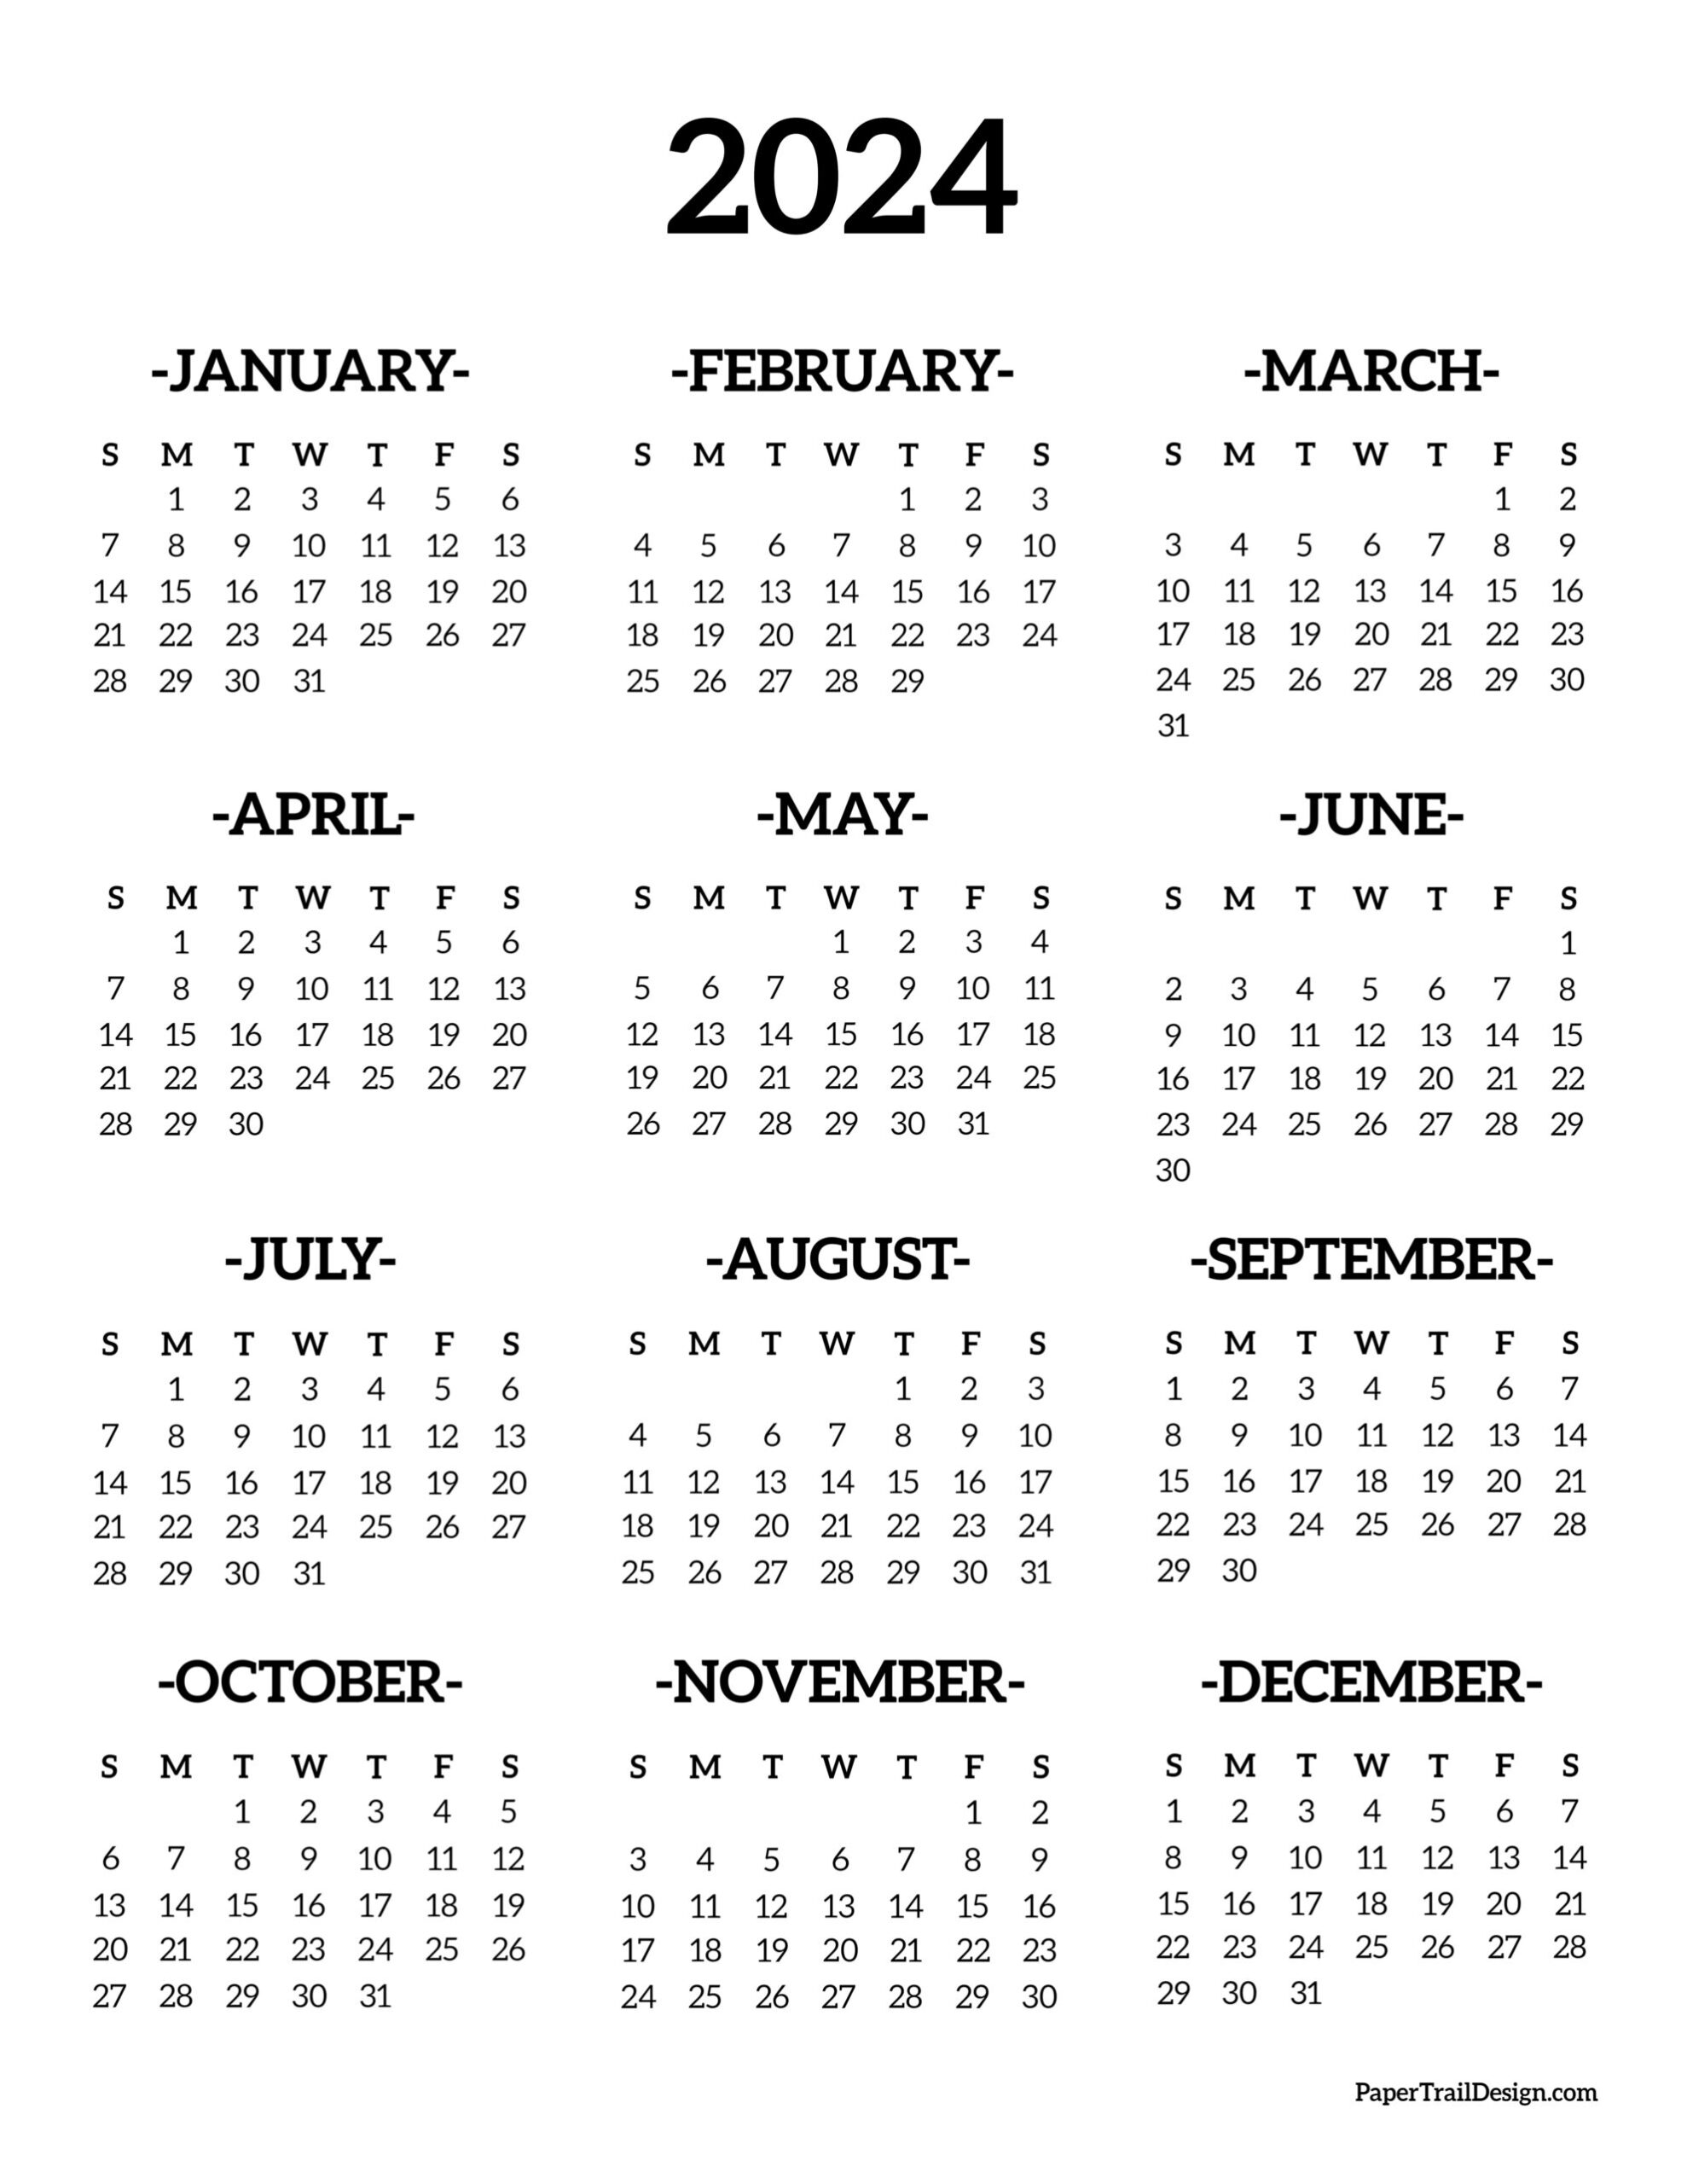 Calendar 2024 Printable One Page - Paper Trail Design for 2024 Calendar Printable 1 Page